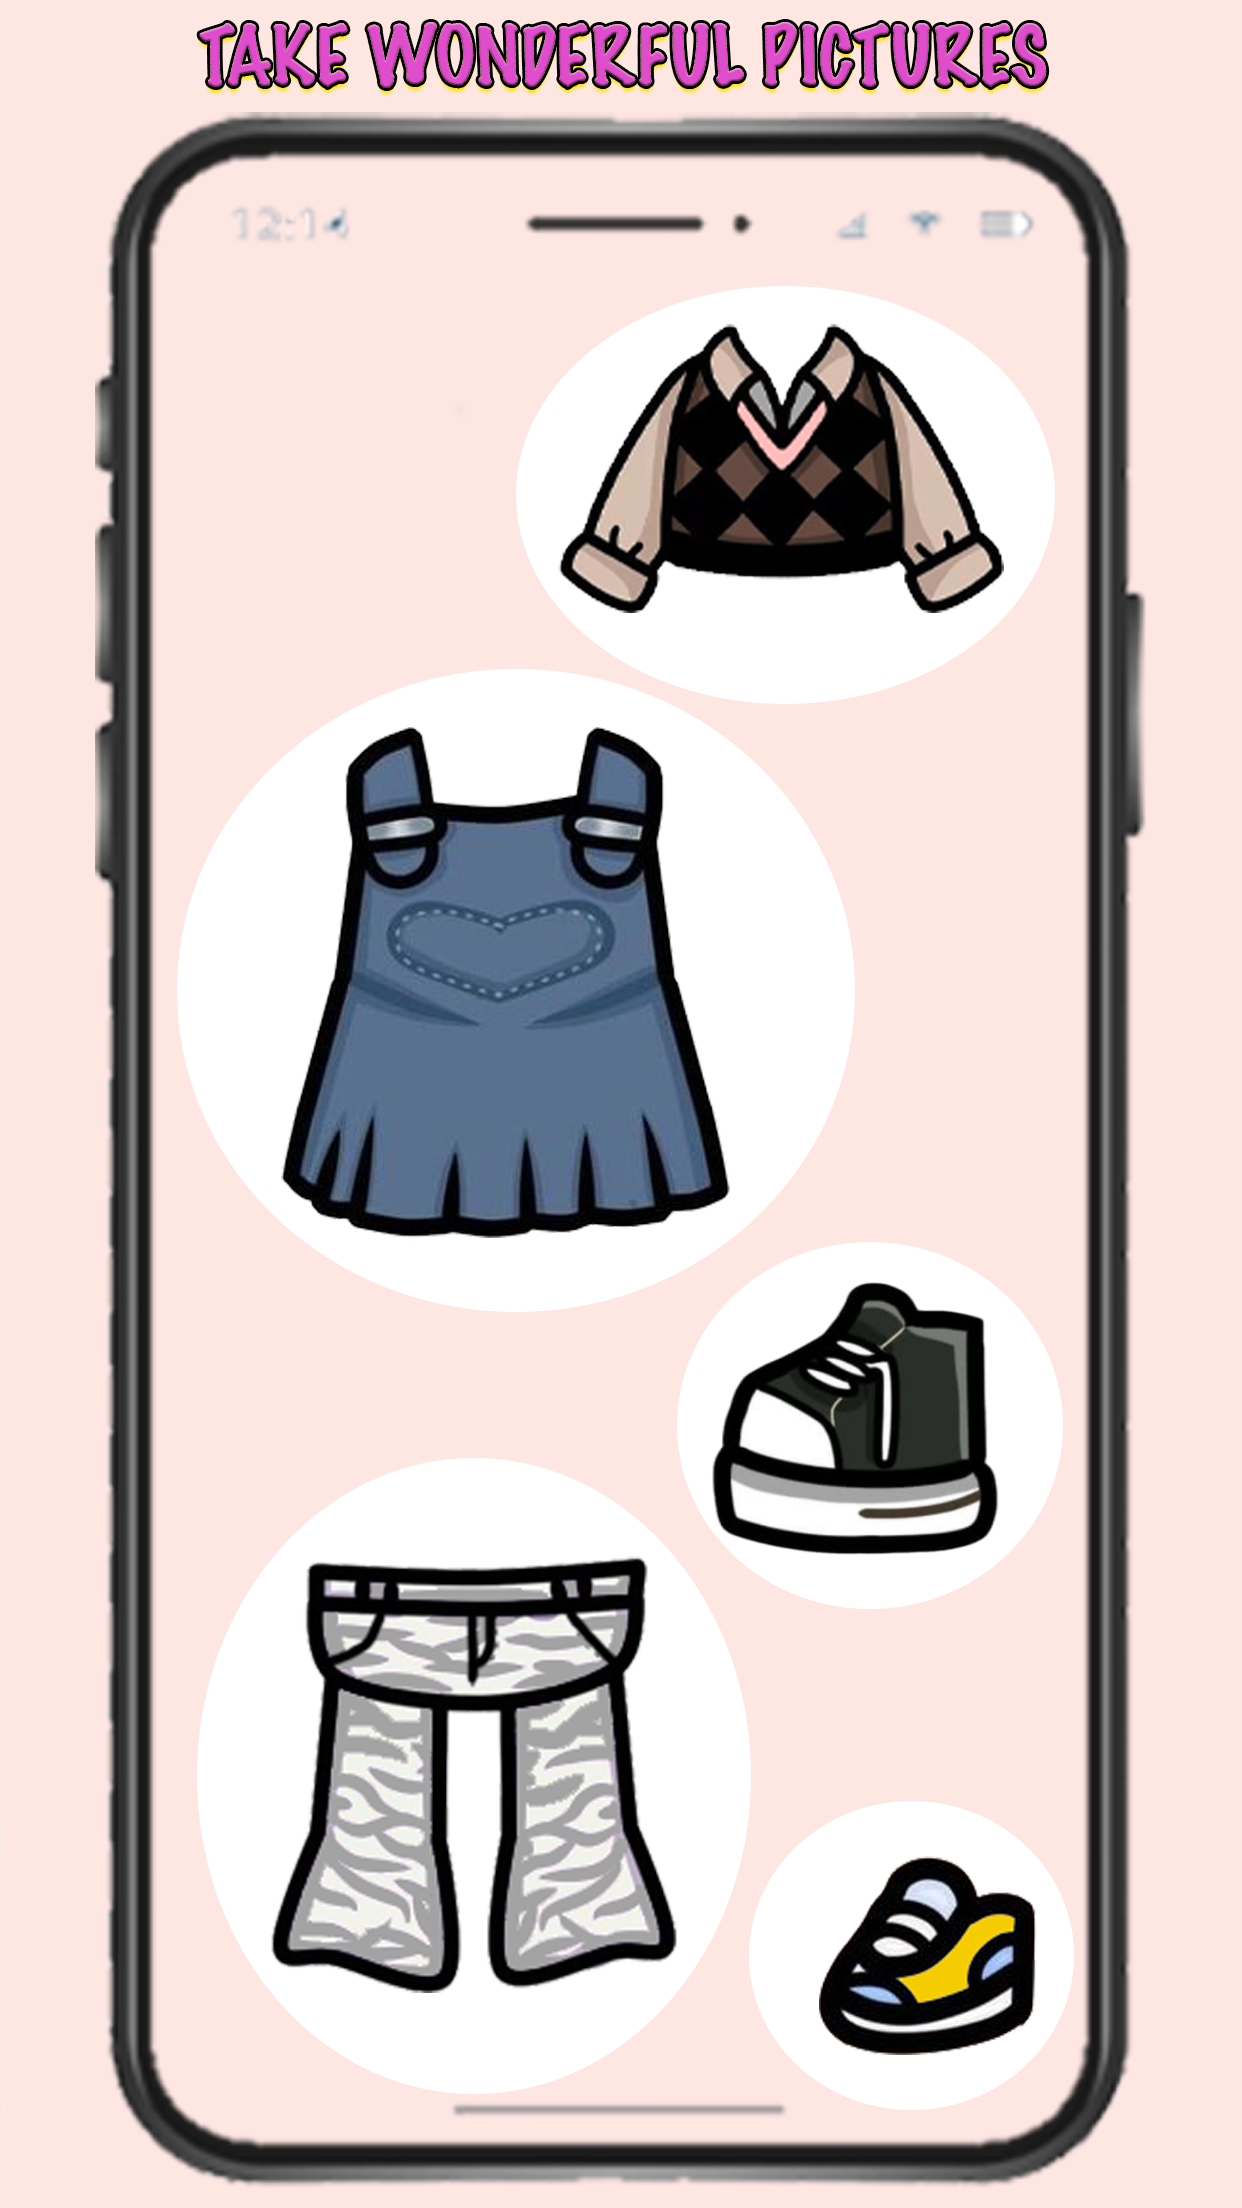 Toca Boca Paper Doll Ideas for Android - Download